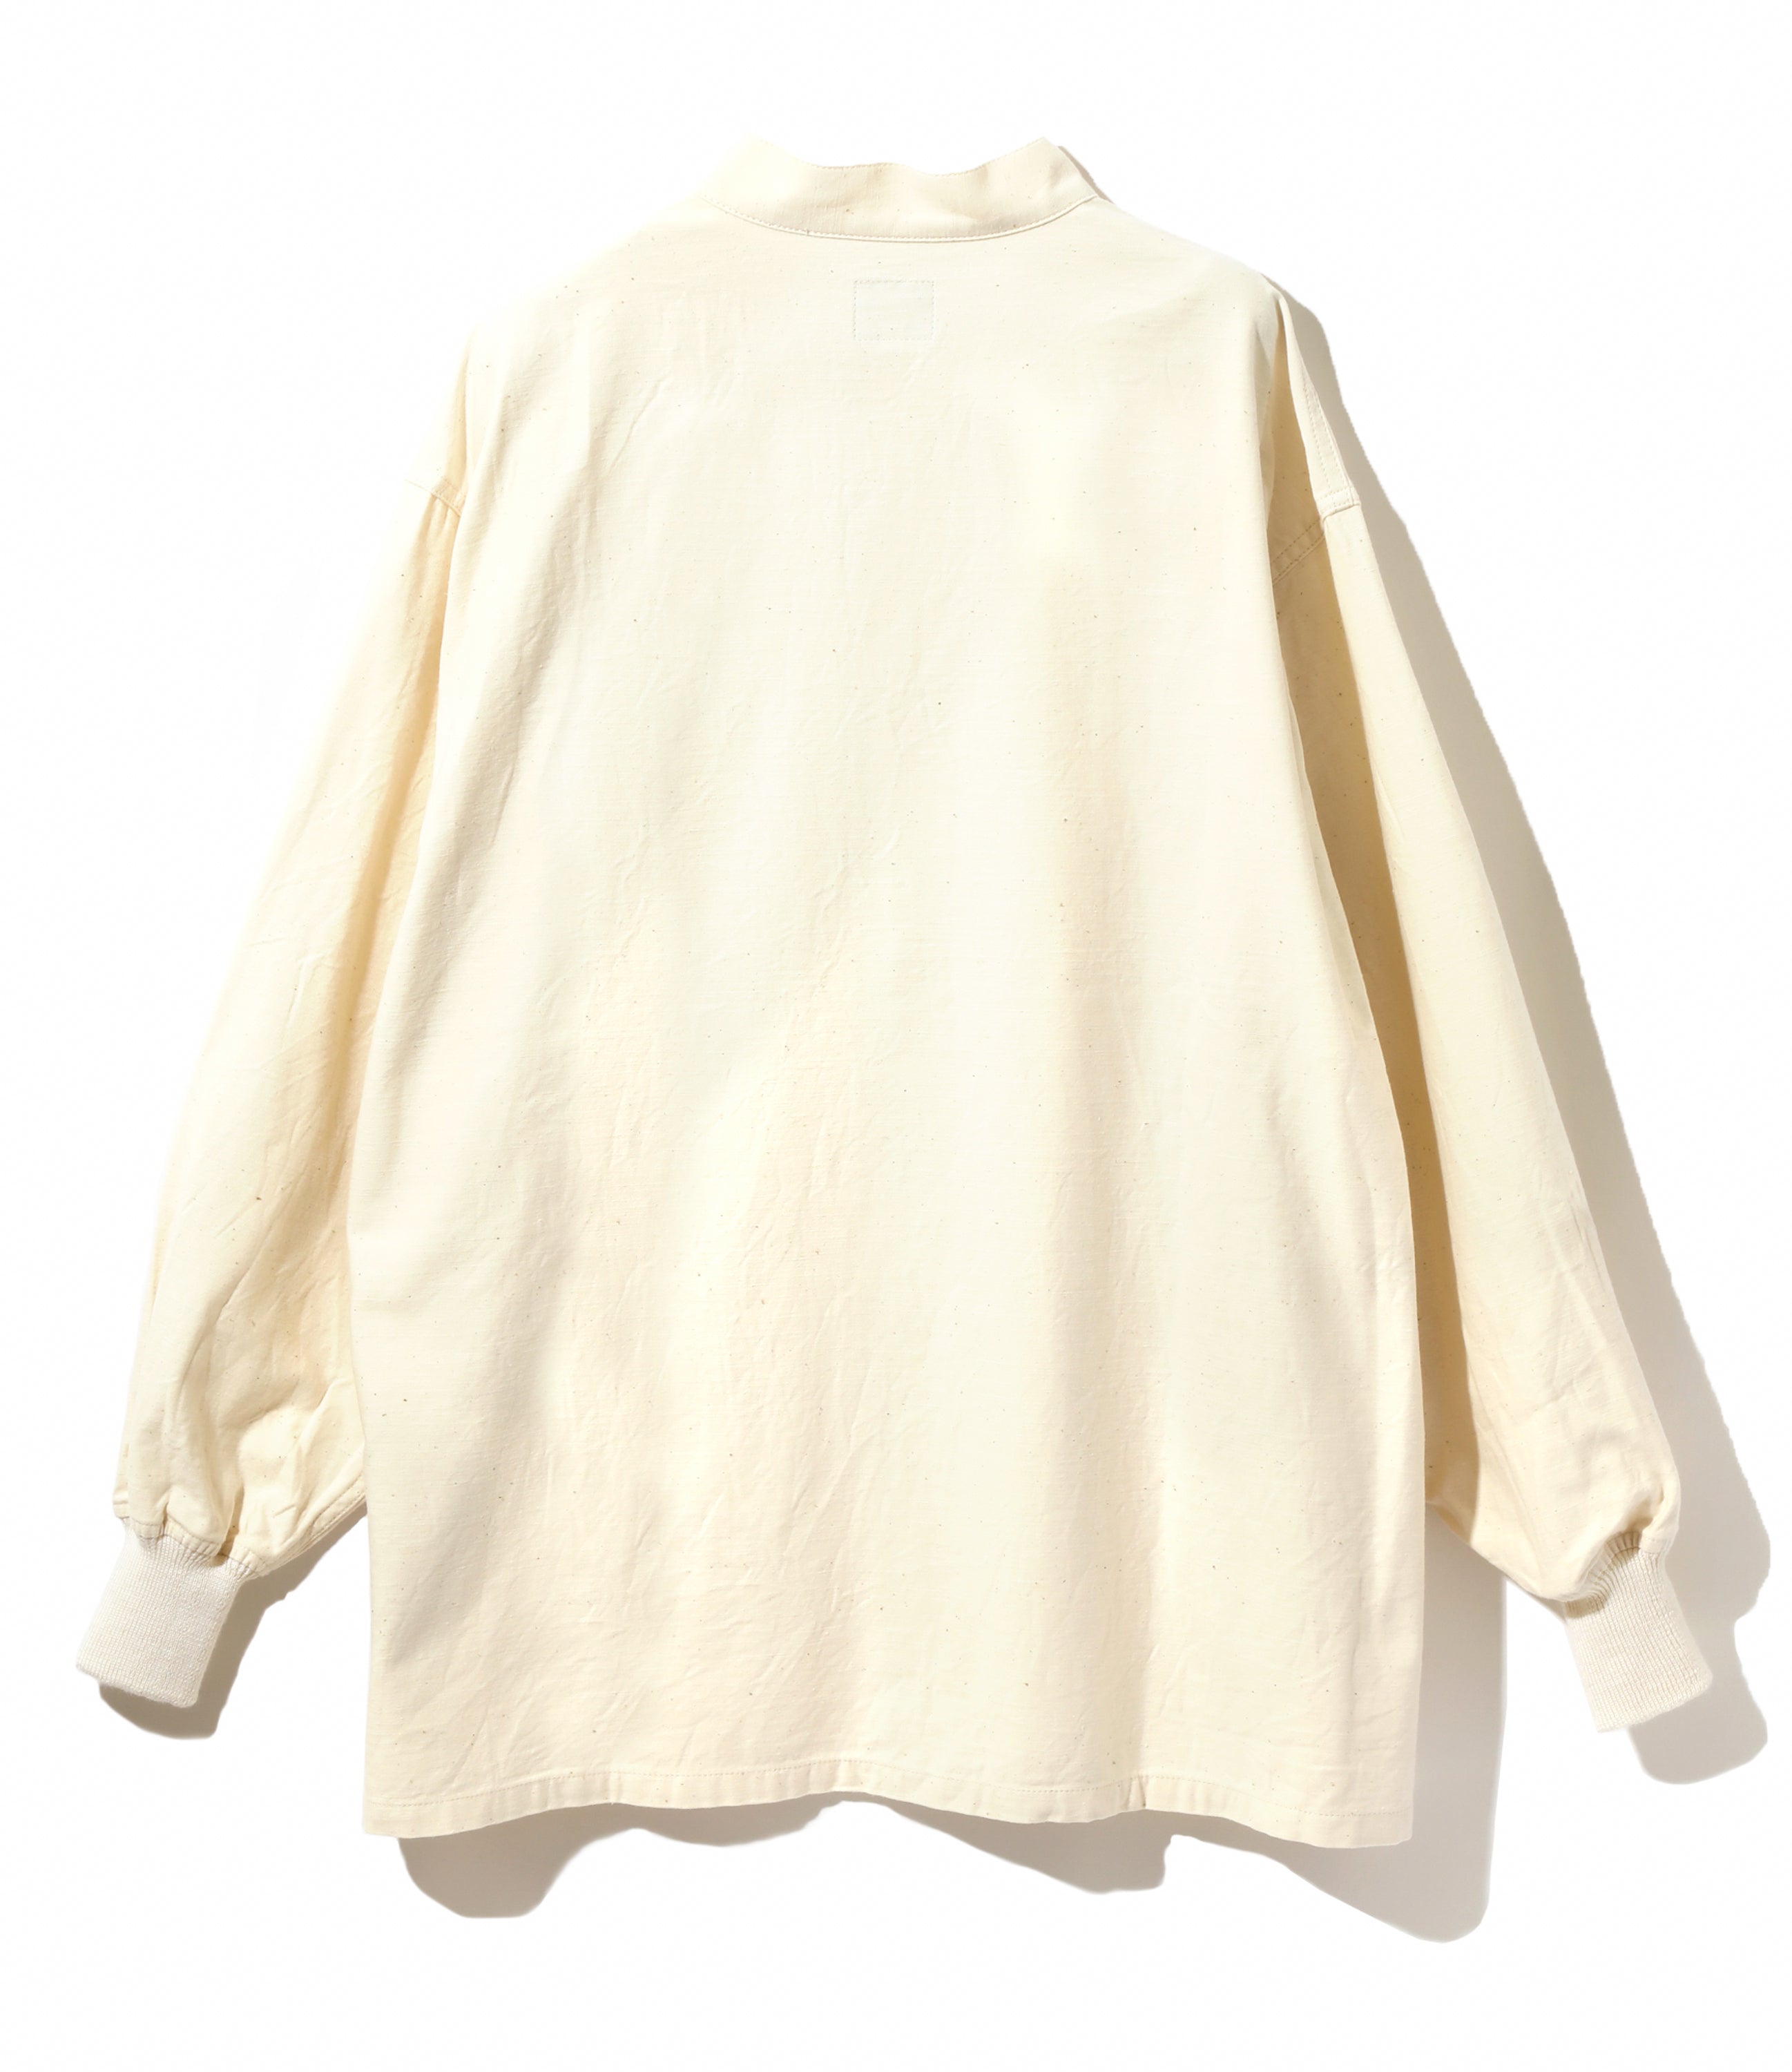 S.C. Army Shirt - White - Back Sateen